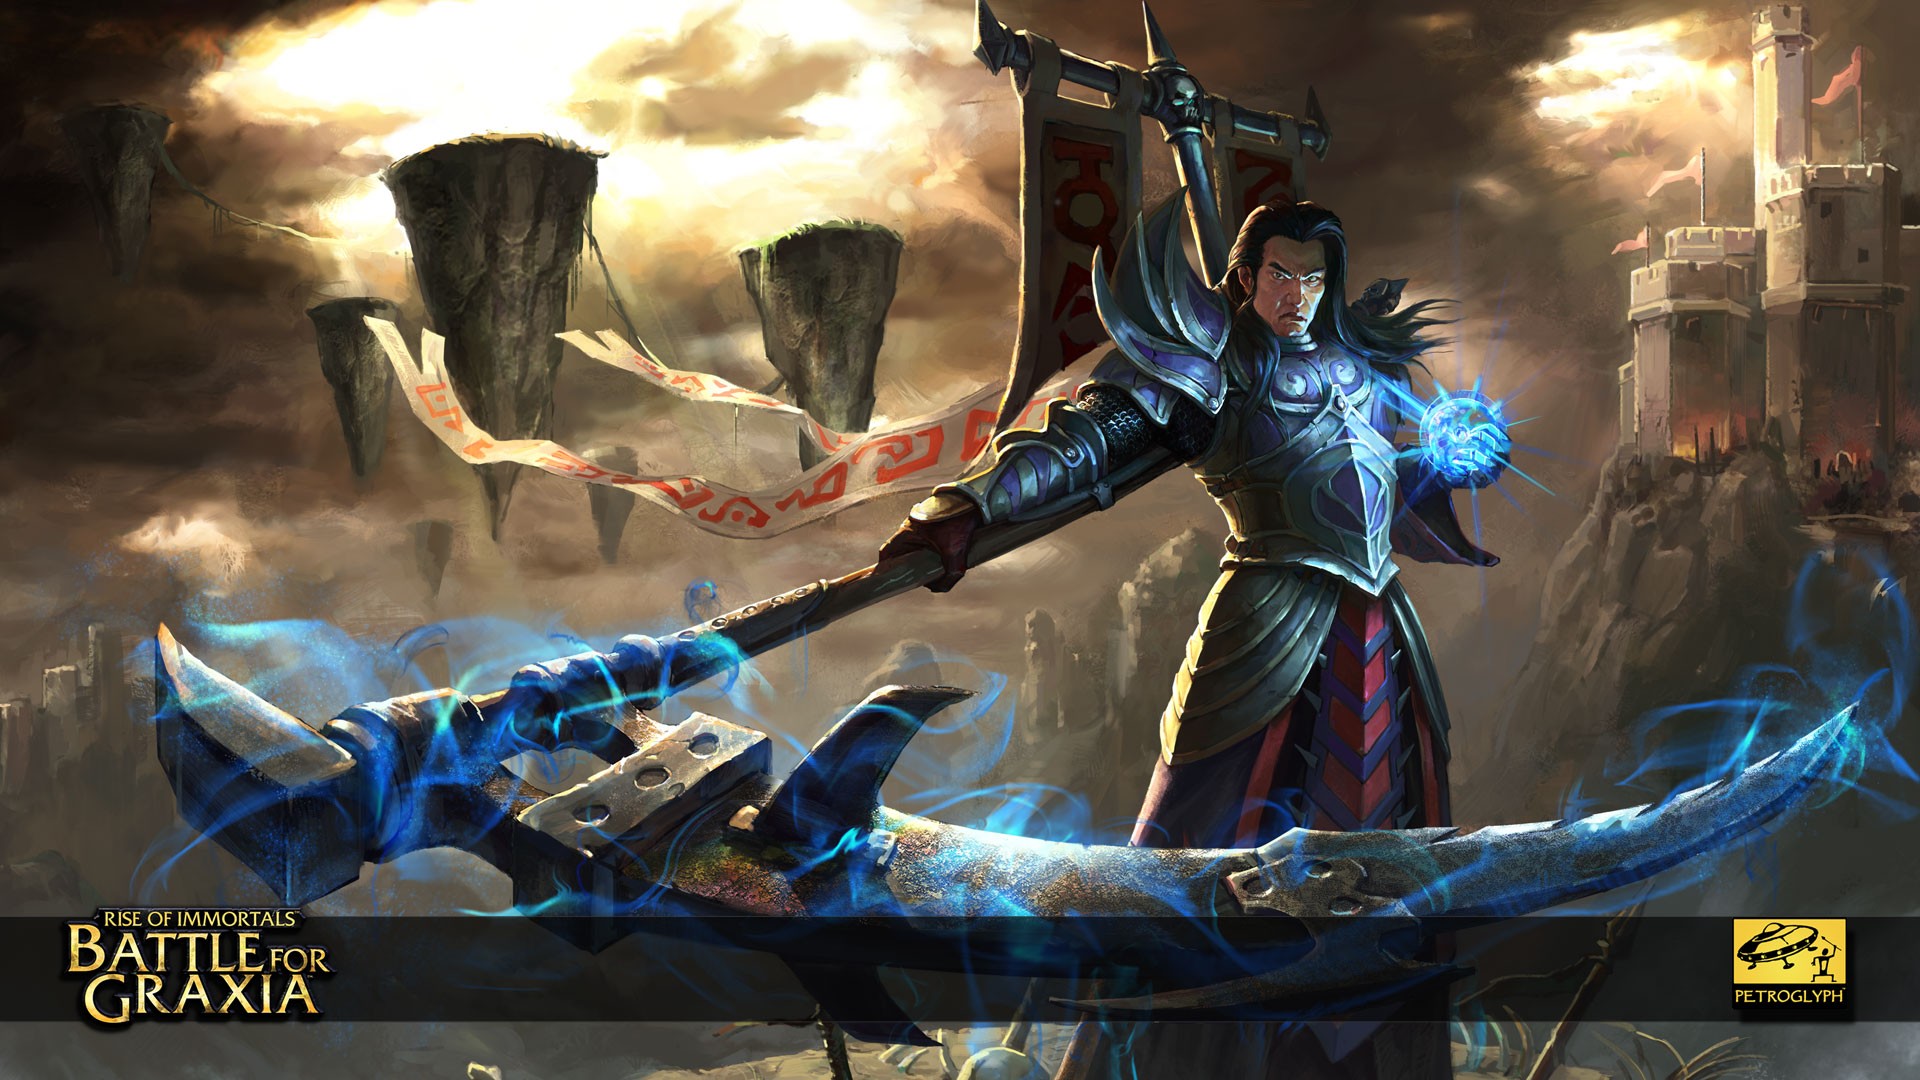 Video Game Rise Of Immortals: Battle For Graxia HD Wallpaper | Background Image